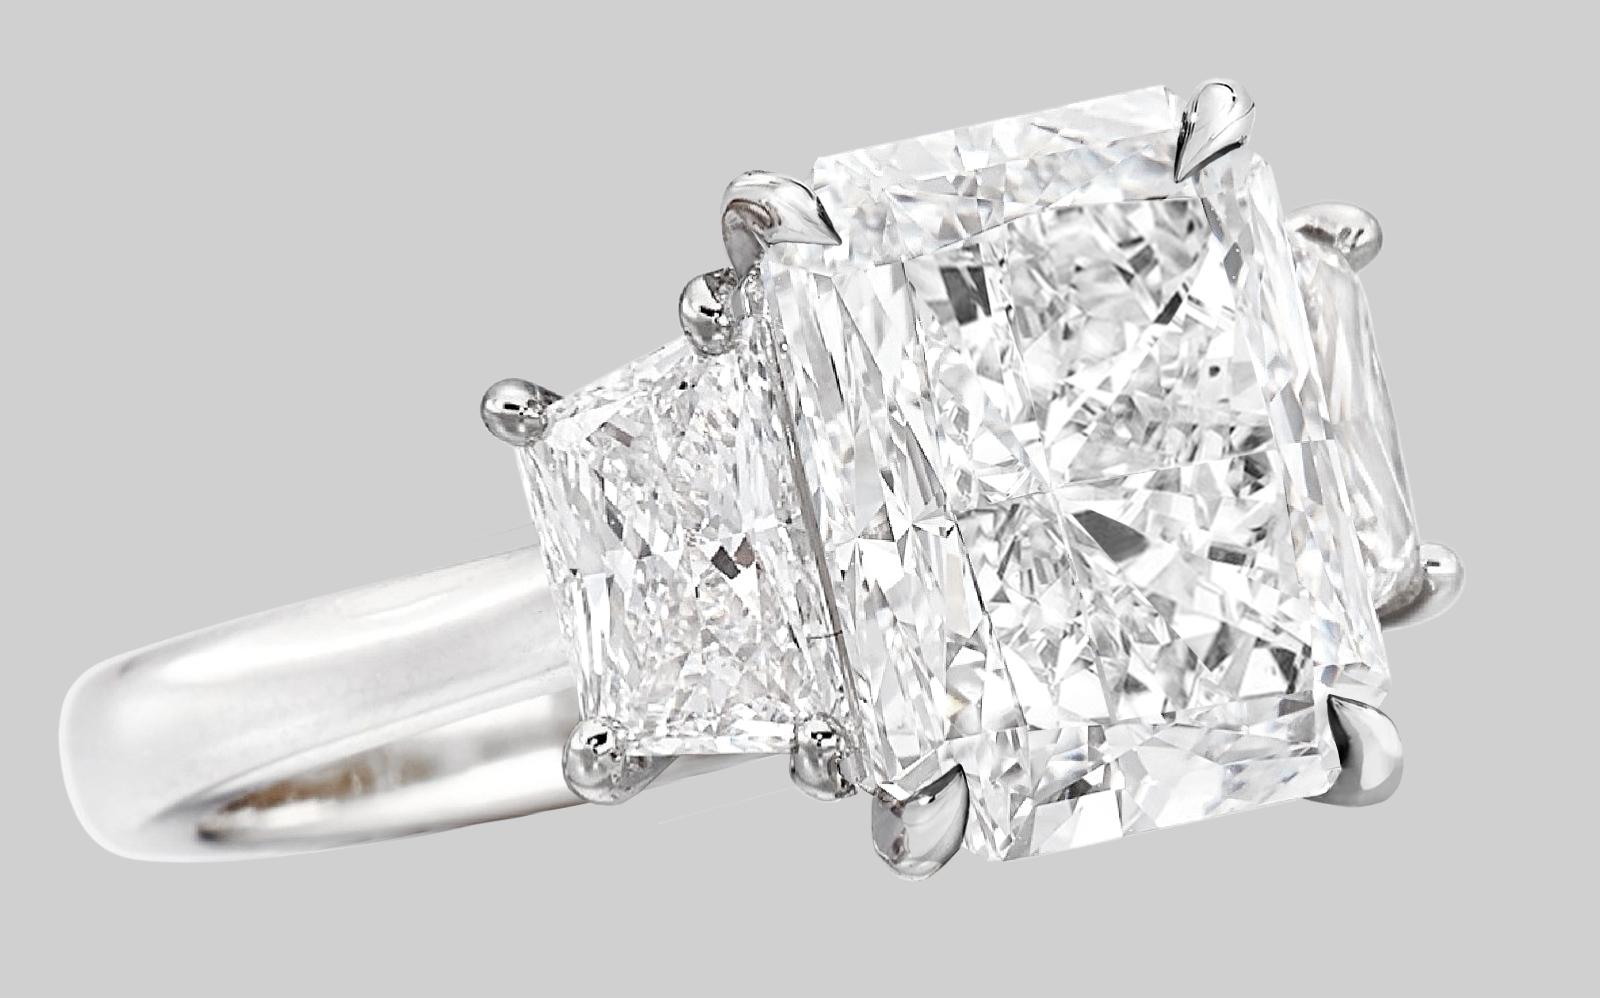 Indulge in the excellence of this extraordinary ring, a true masterpiece of jewelry. Its magnificent center stone, a GIA-certified 4 carat diamond, radiates with unparalleled clarity and purity, boasting an E color grade that enhances its unmatched